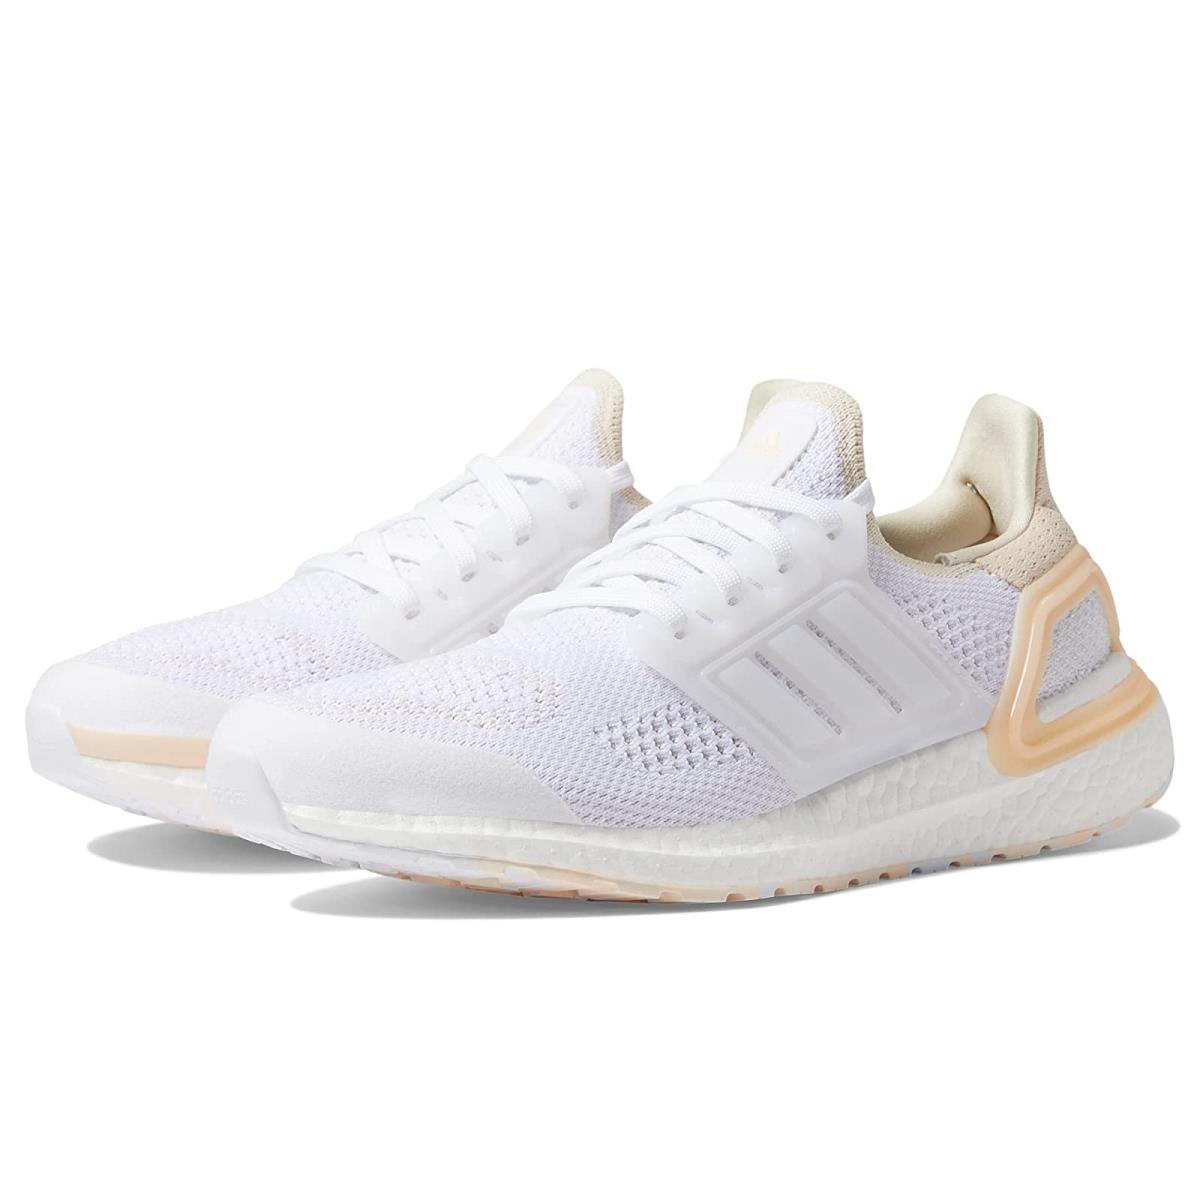 Woman`s Sneakers Athletic Shoes Adidas Running Ultraboost 19.5 Alphaskin White/White/Bliss Orange